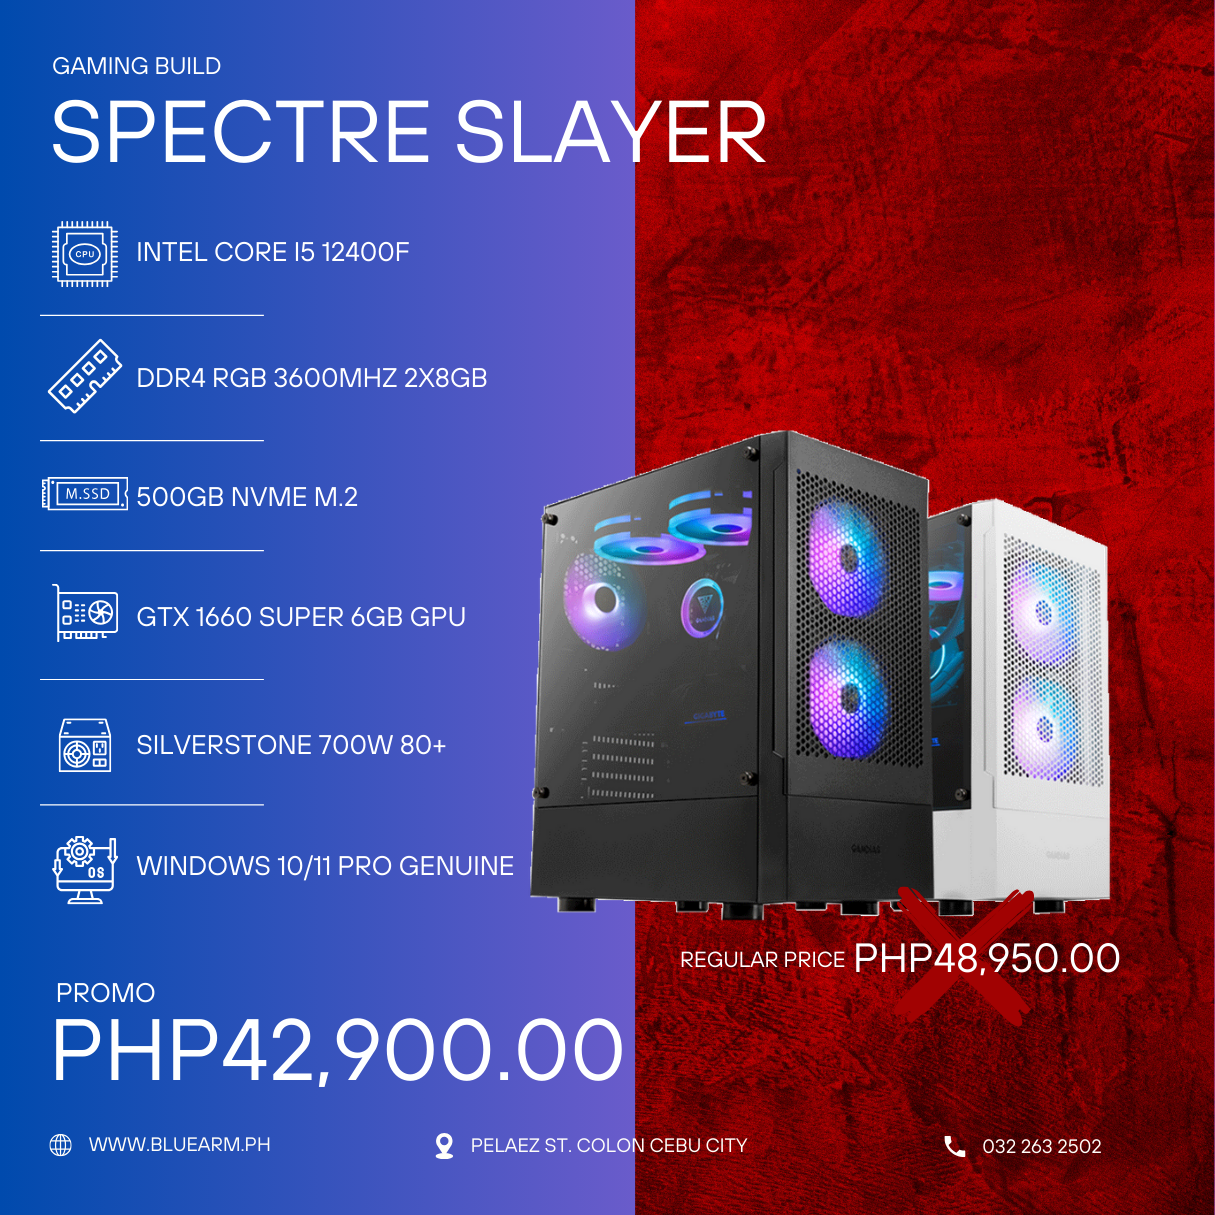 Spectre Slayer Gaming Build